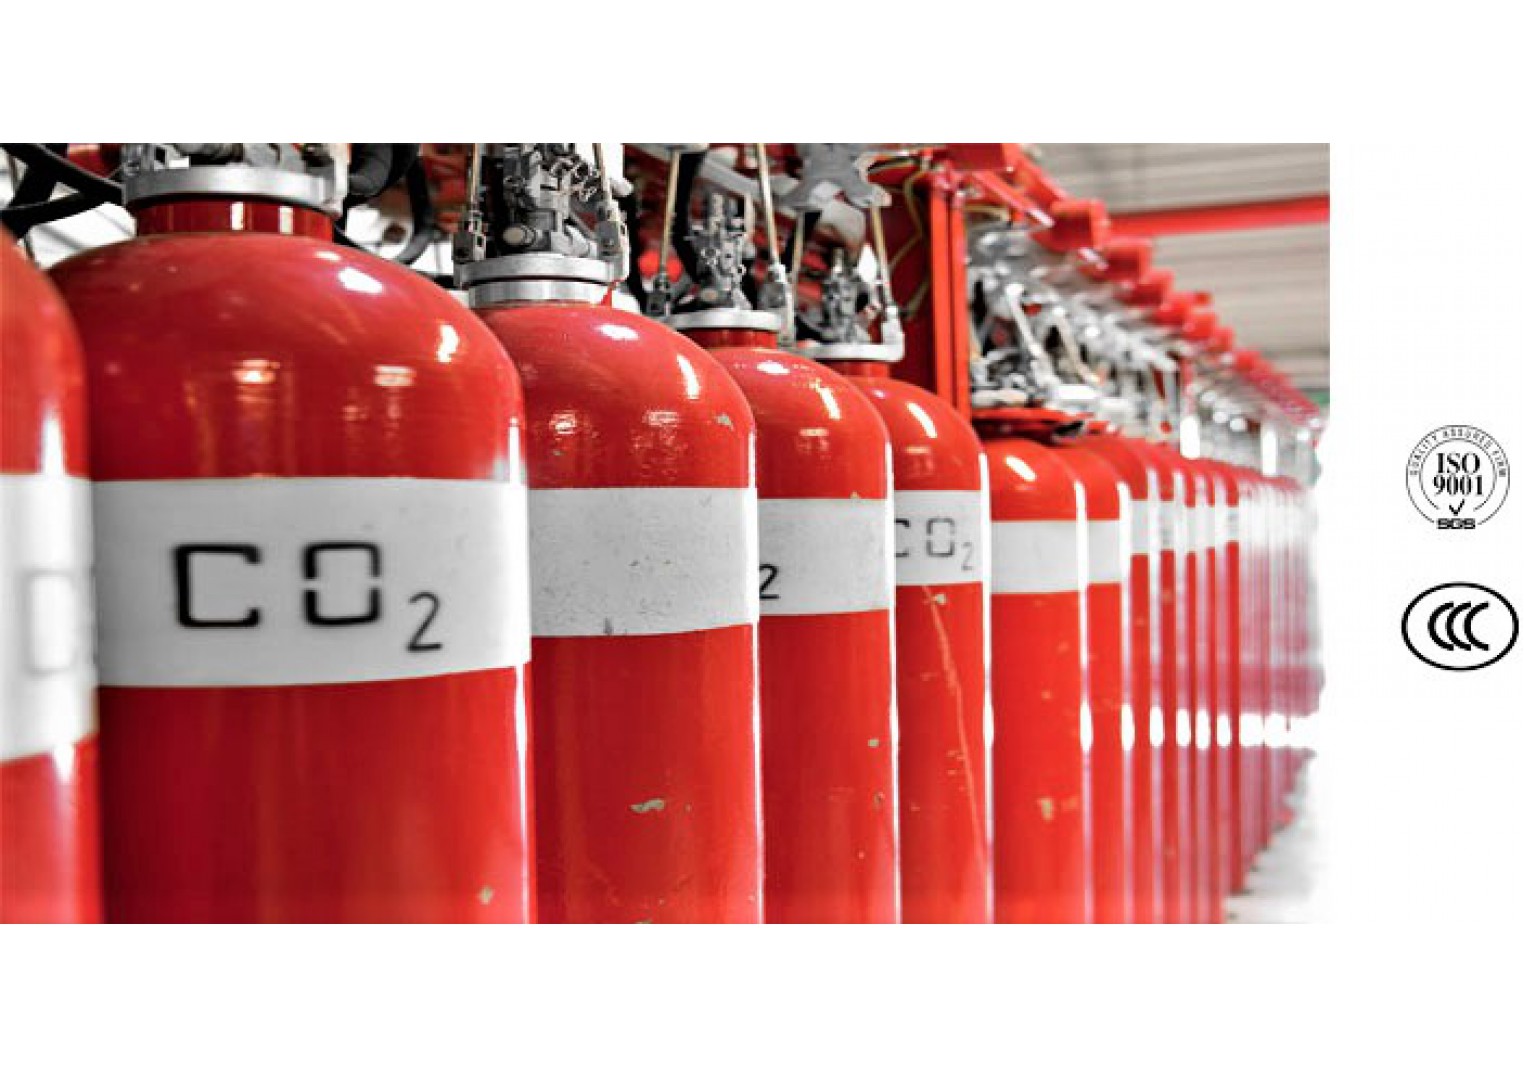 HP CO2 fire suppression system Q05-80